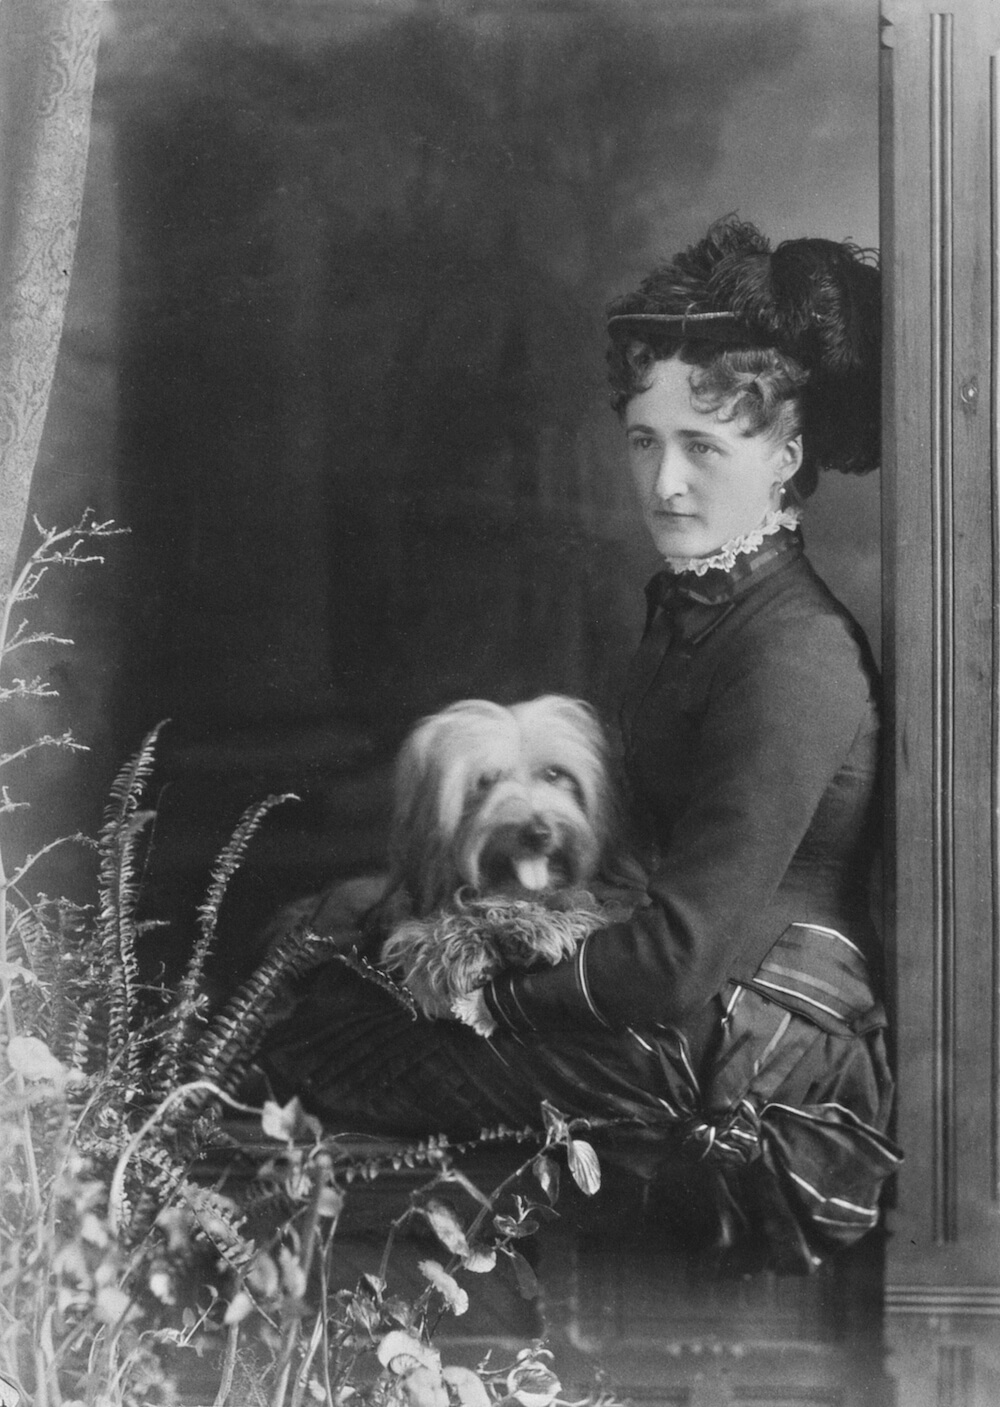 1881 - Miss Hawley and dog, Montreal